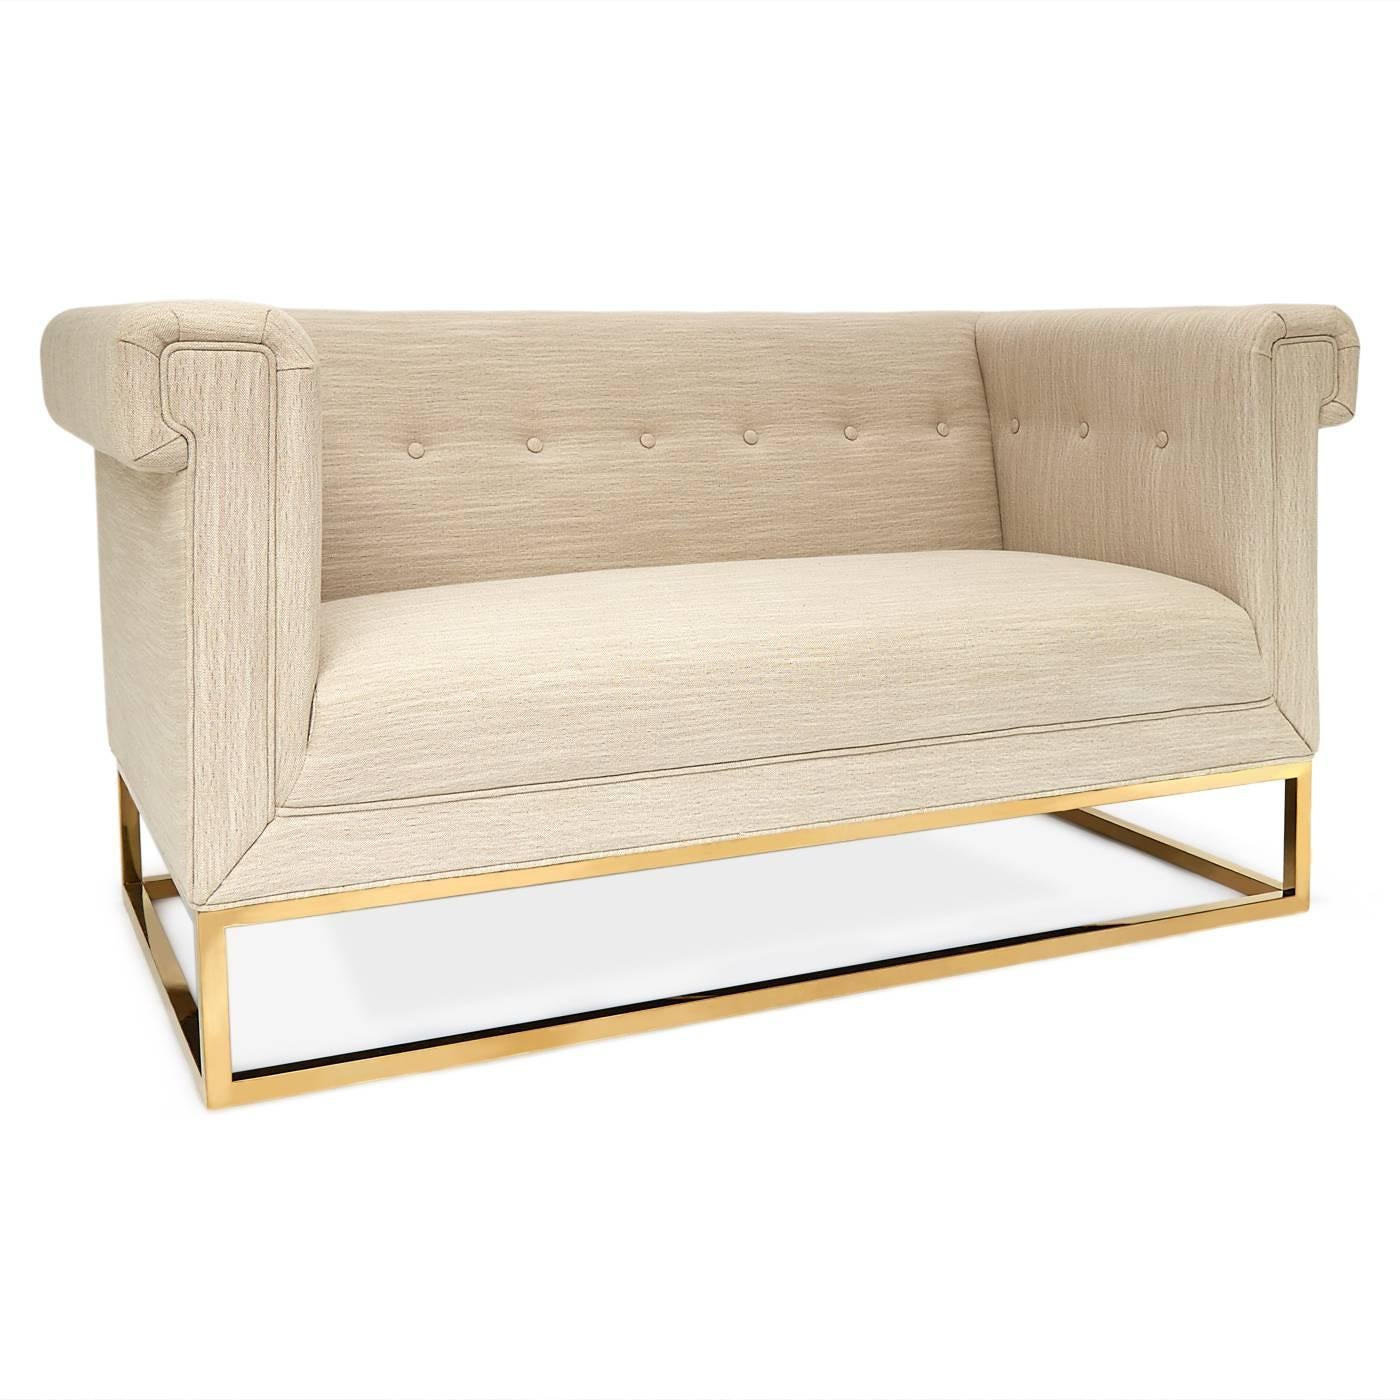 New Traditionalism. Modern minimalism meets traditional English in our Caine settee. High tuxedo arms and mitered seams create a tailored profile while the polished brass base screams luxury. This settee is sized for smaller spaces and doesn't